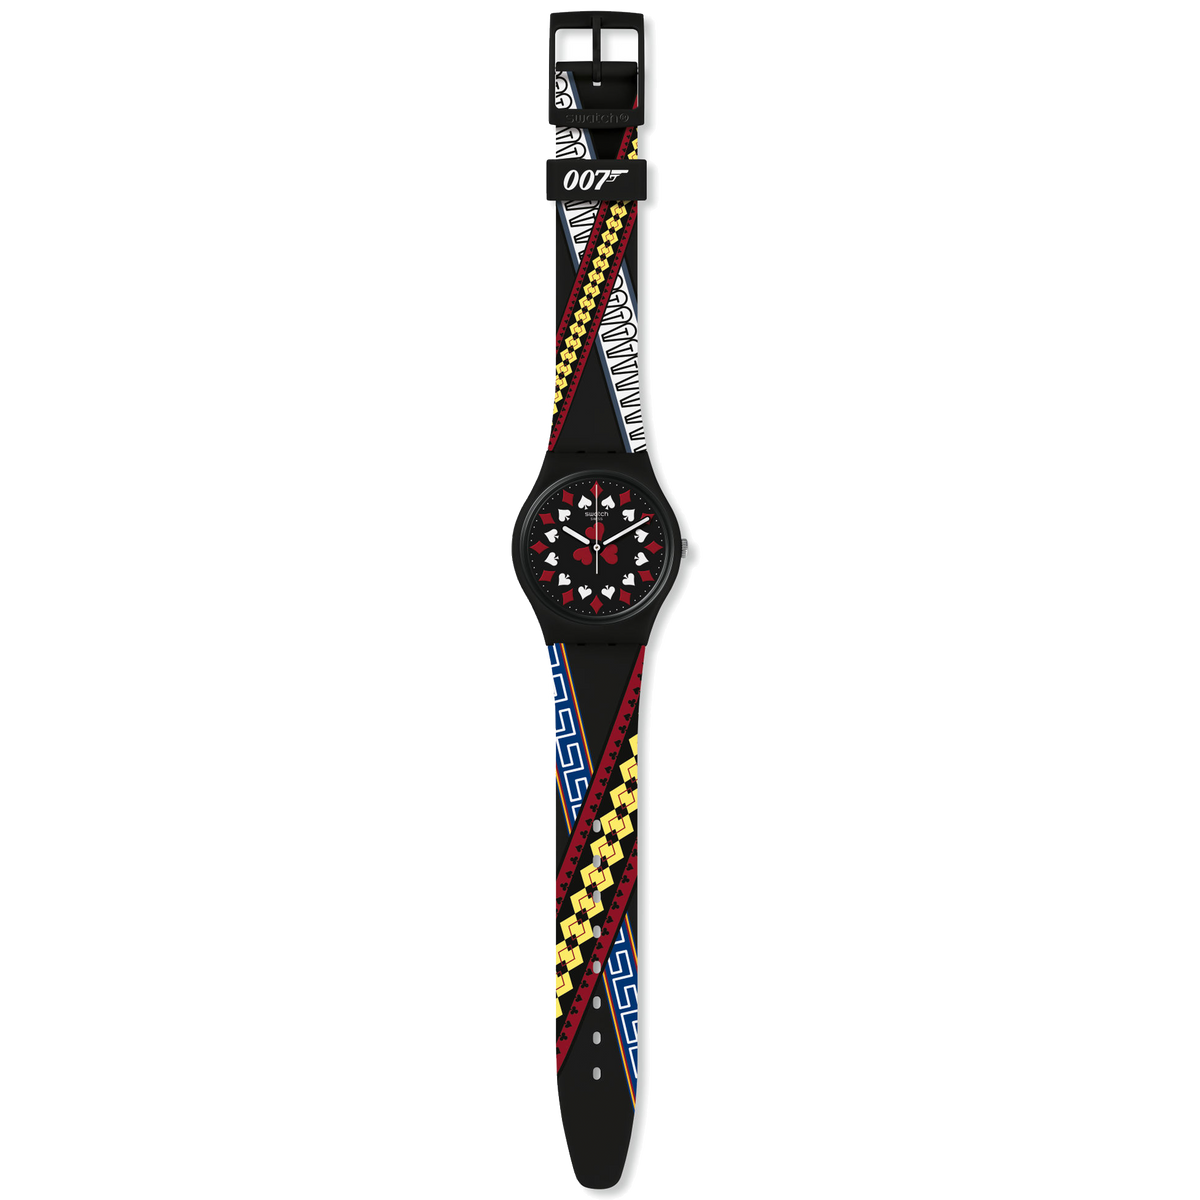 Swatch Watch 34mm - 007 Edition - Casino Royale 2006